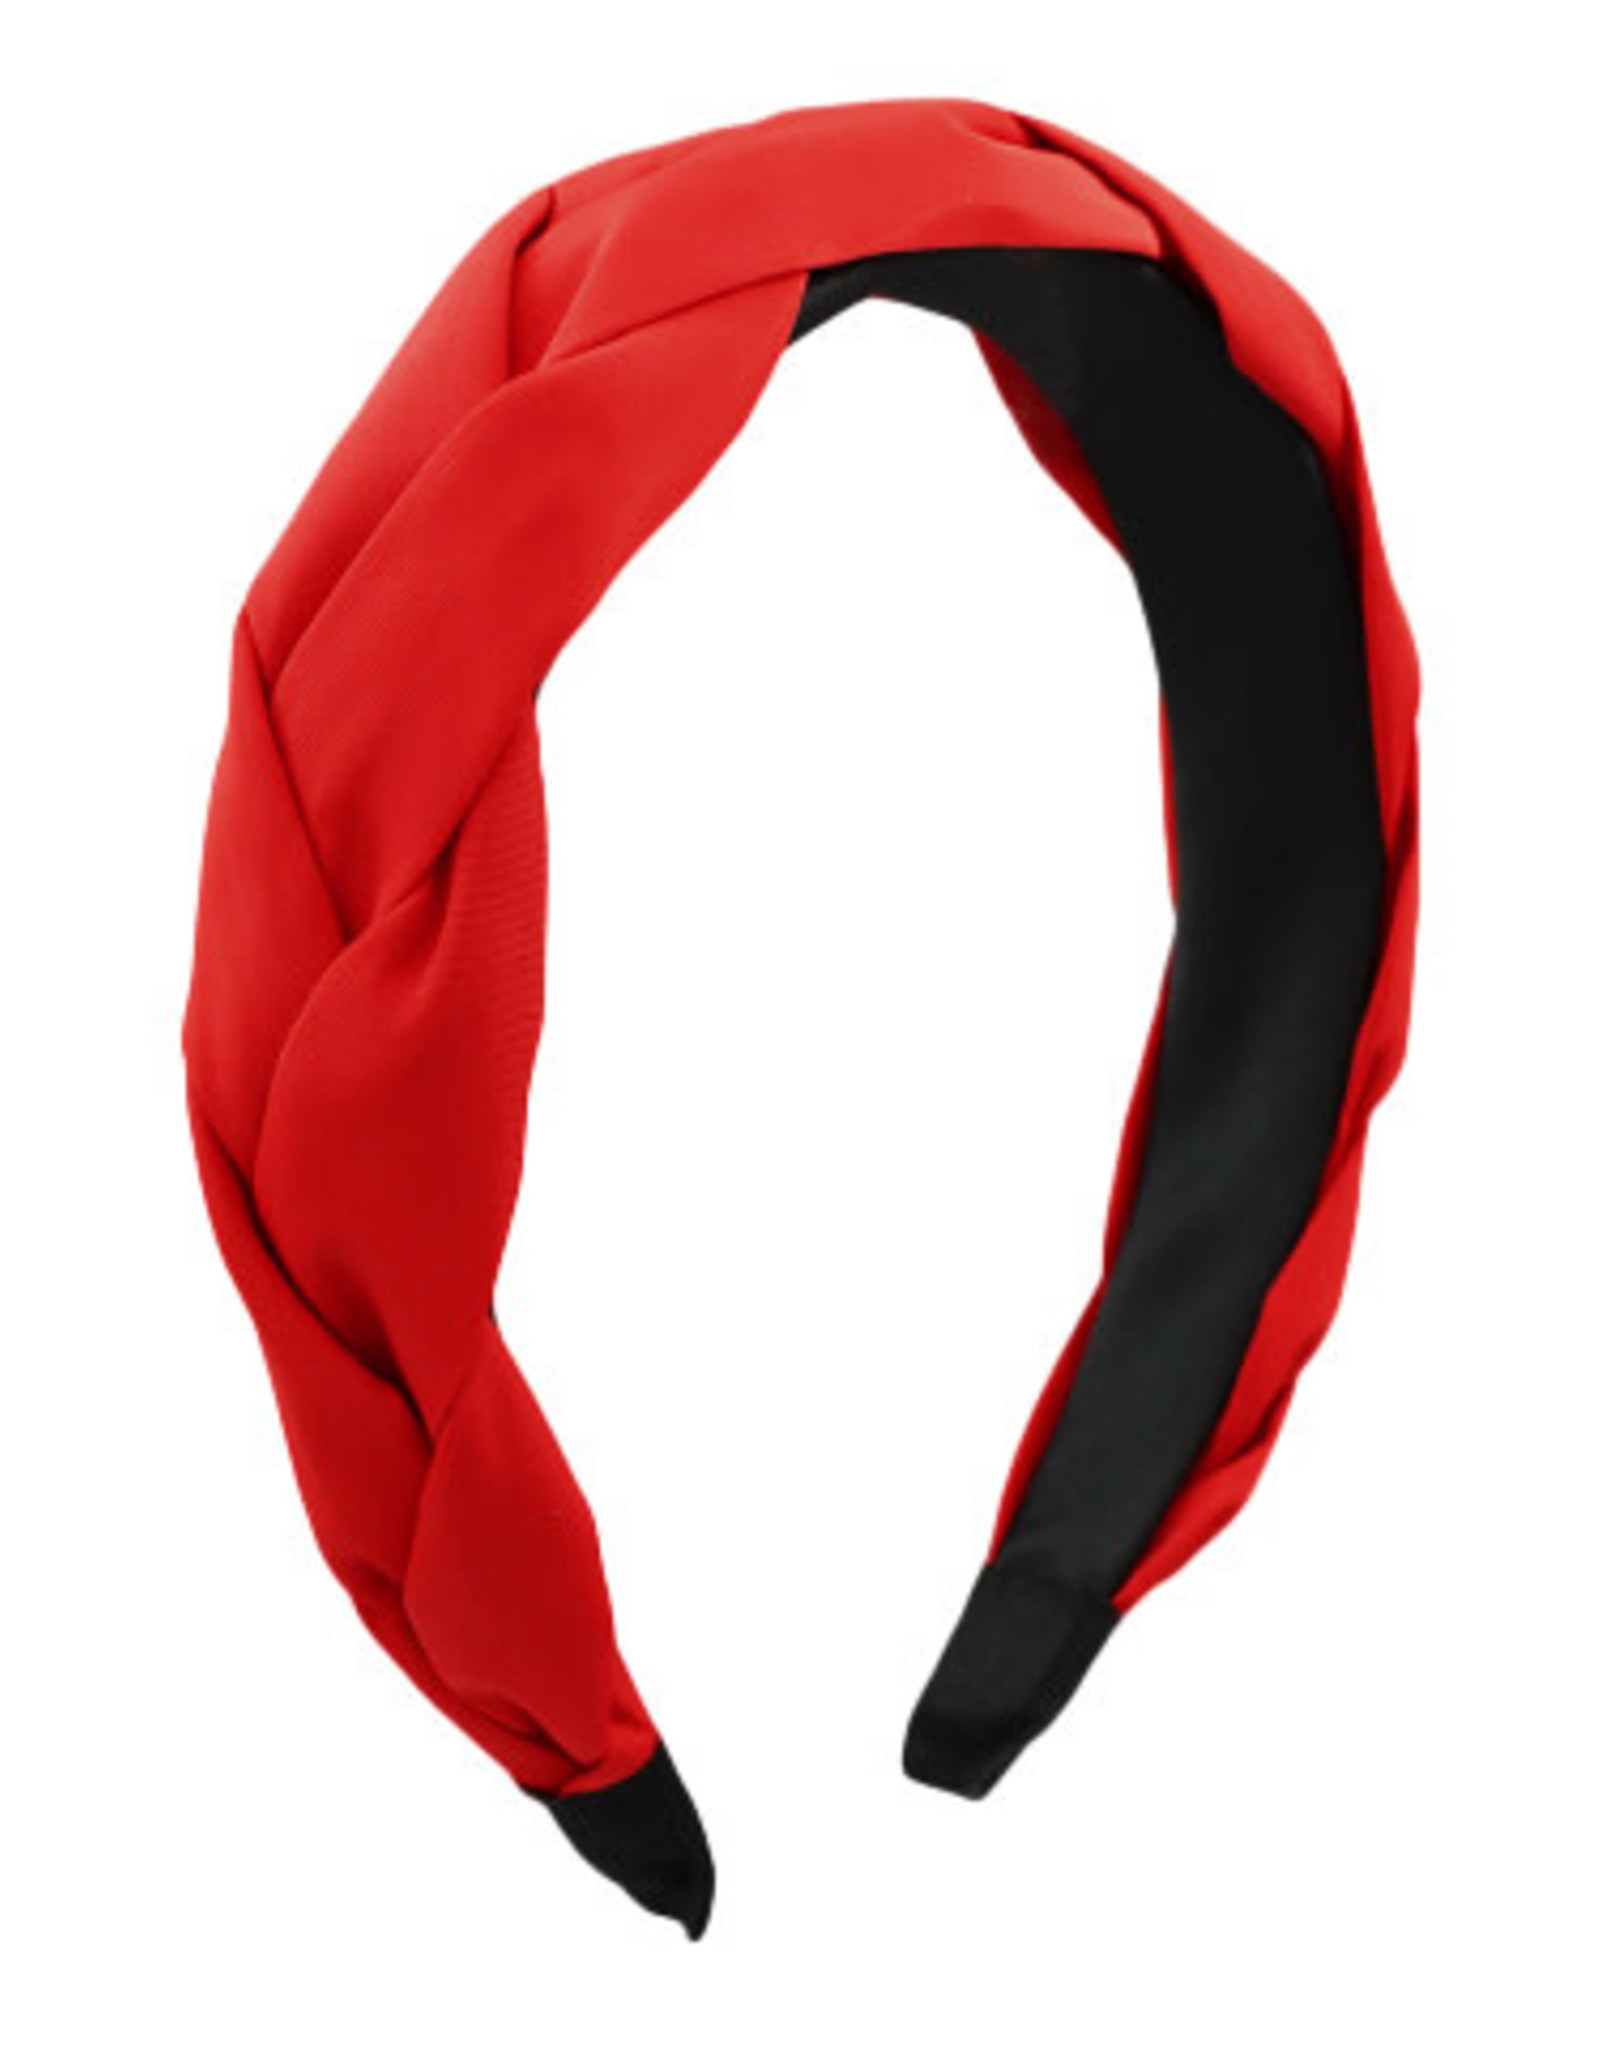 Scallop Headband in Red